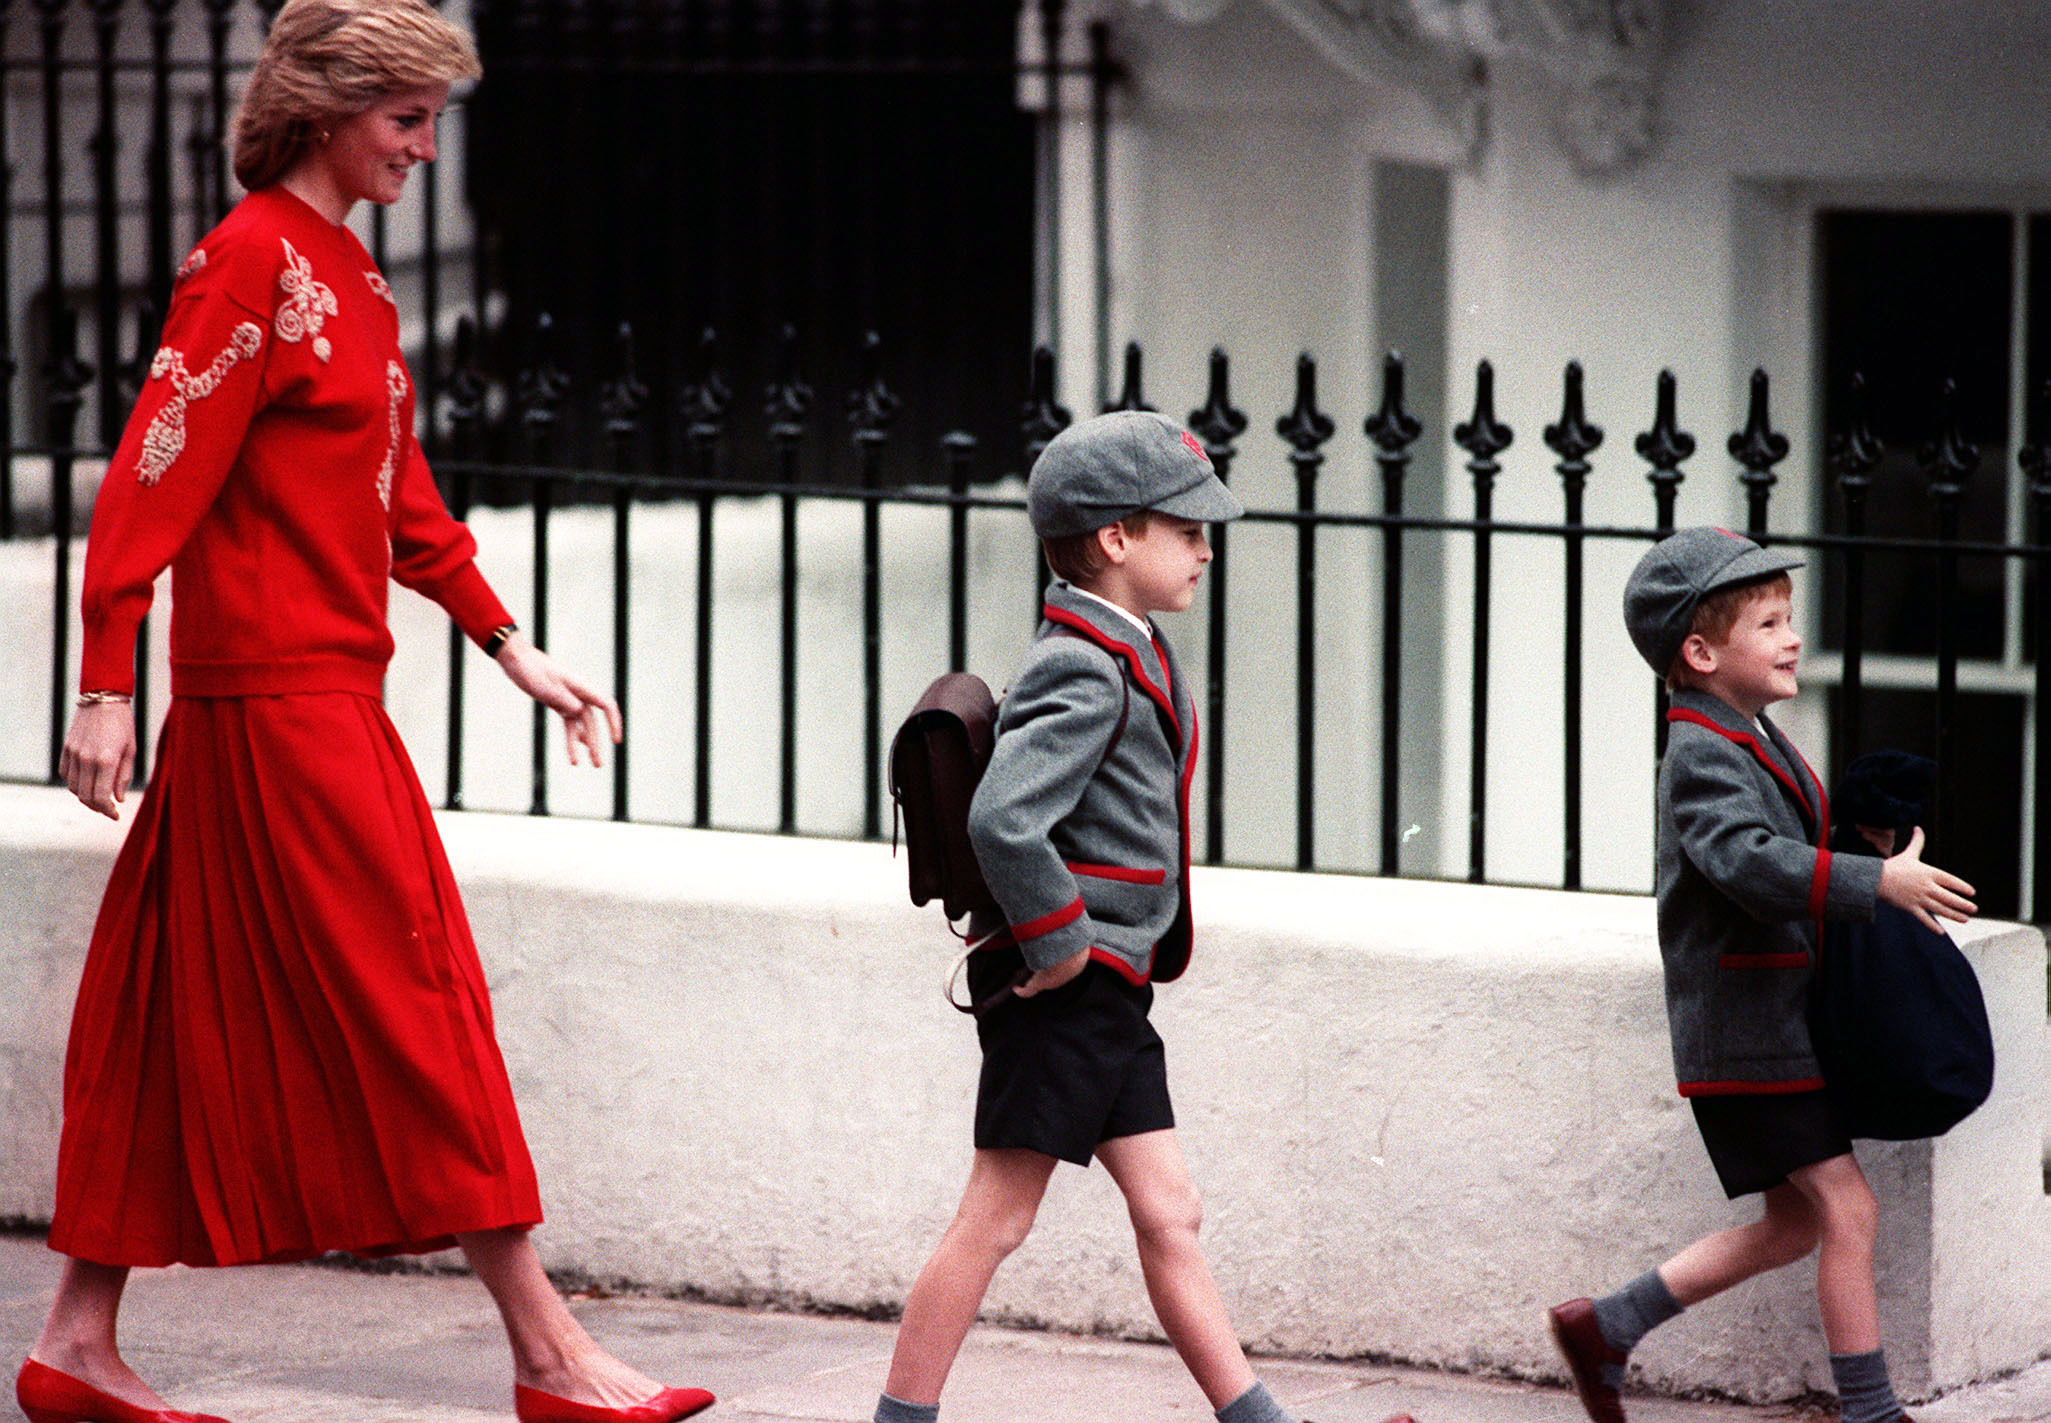 File photo dated Sept. 15, 1989 of the Princess of Wales following her sons Prince Harry (right), five years old, and Prince William, seven, on Harry's first day at the Wetherby School in Notting Hill, West London.